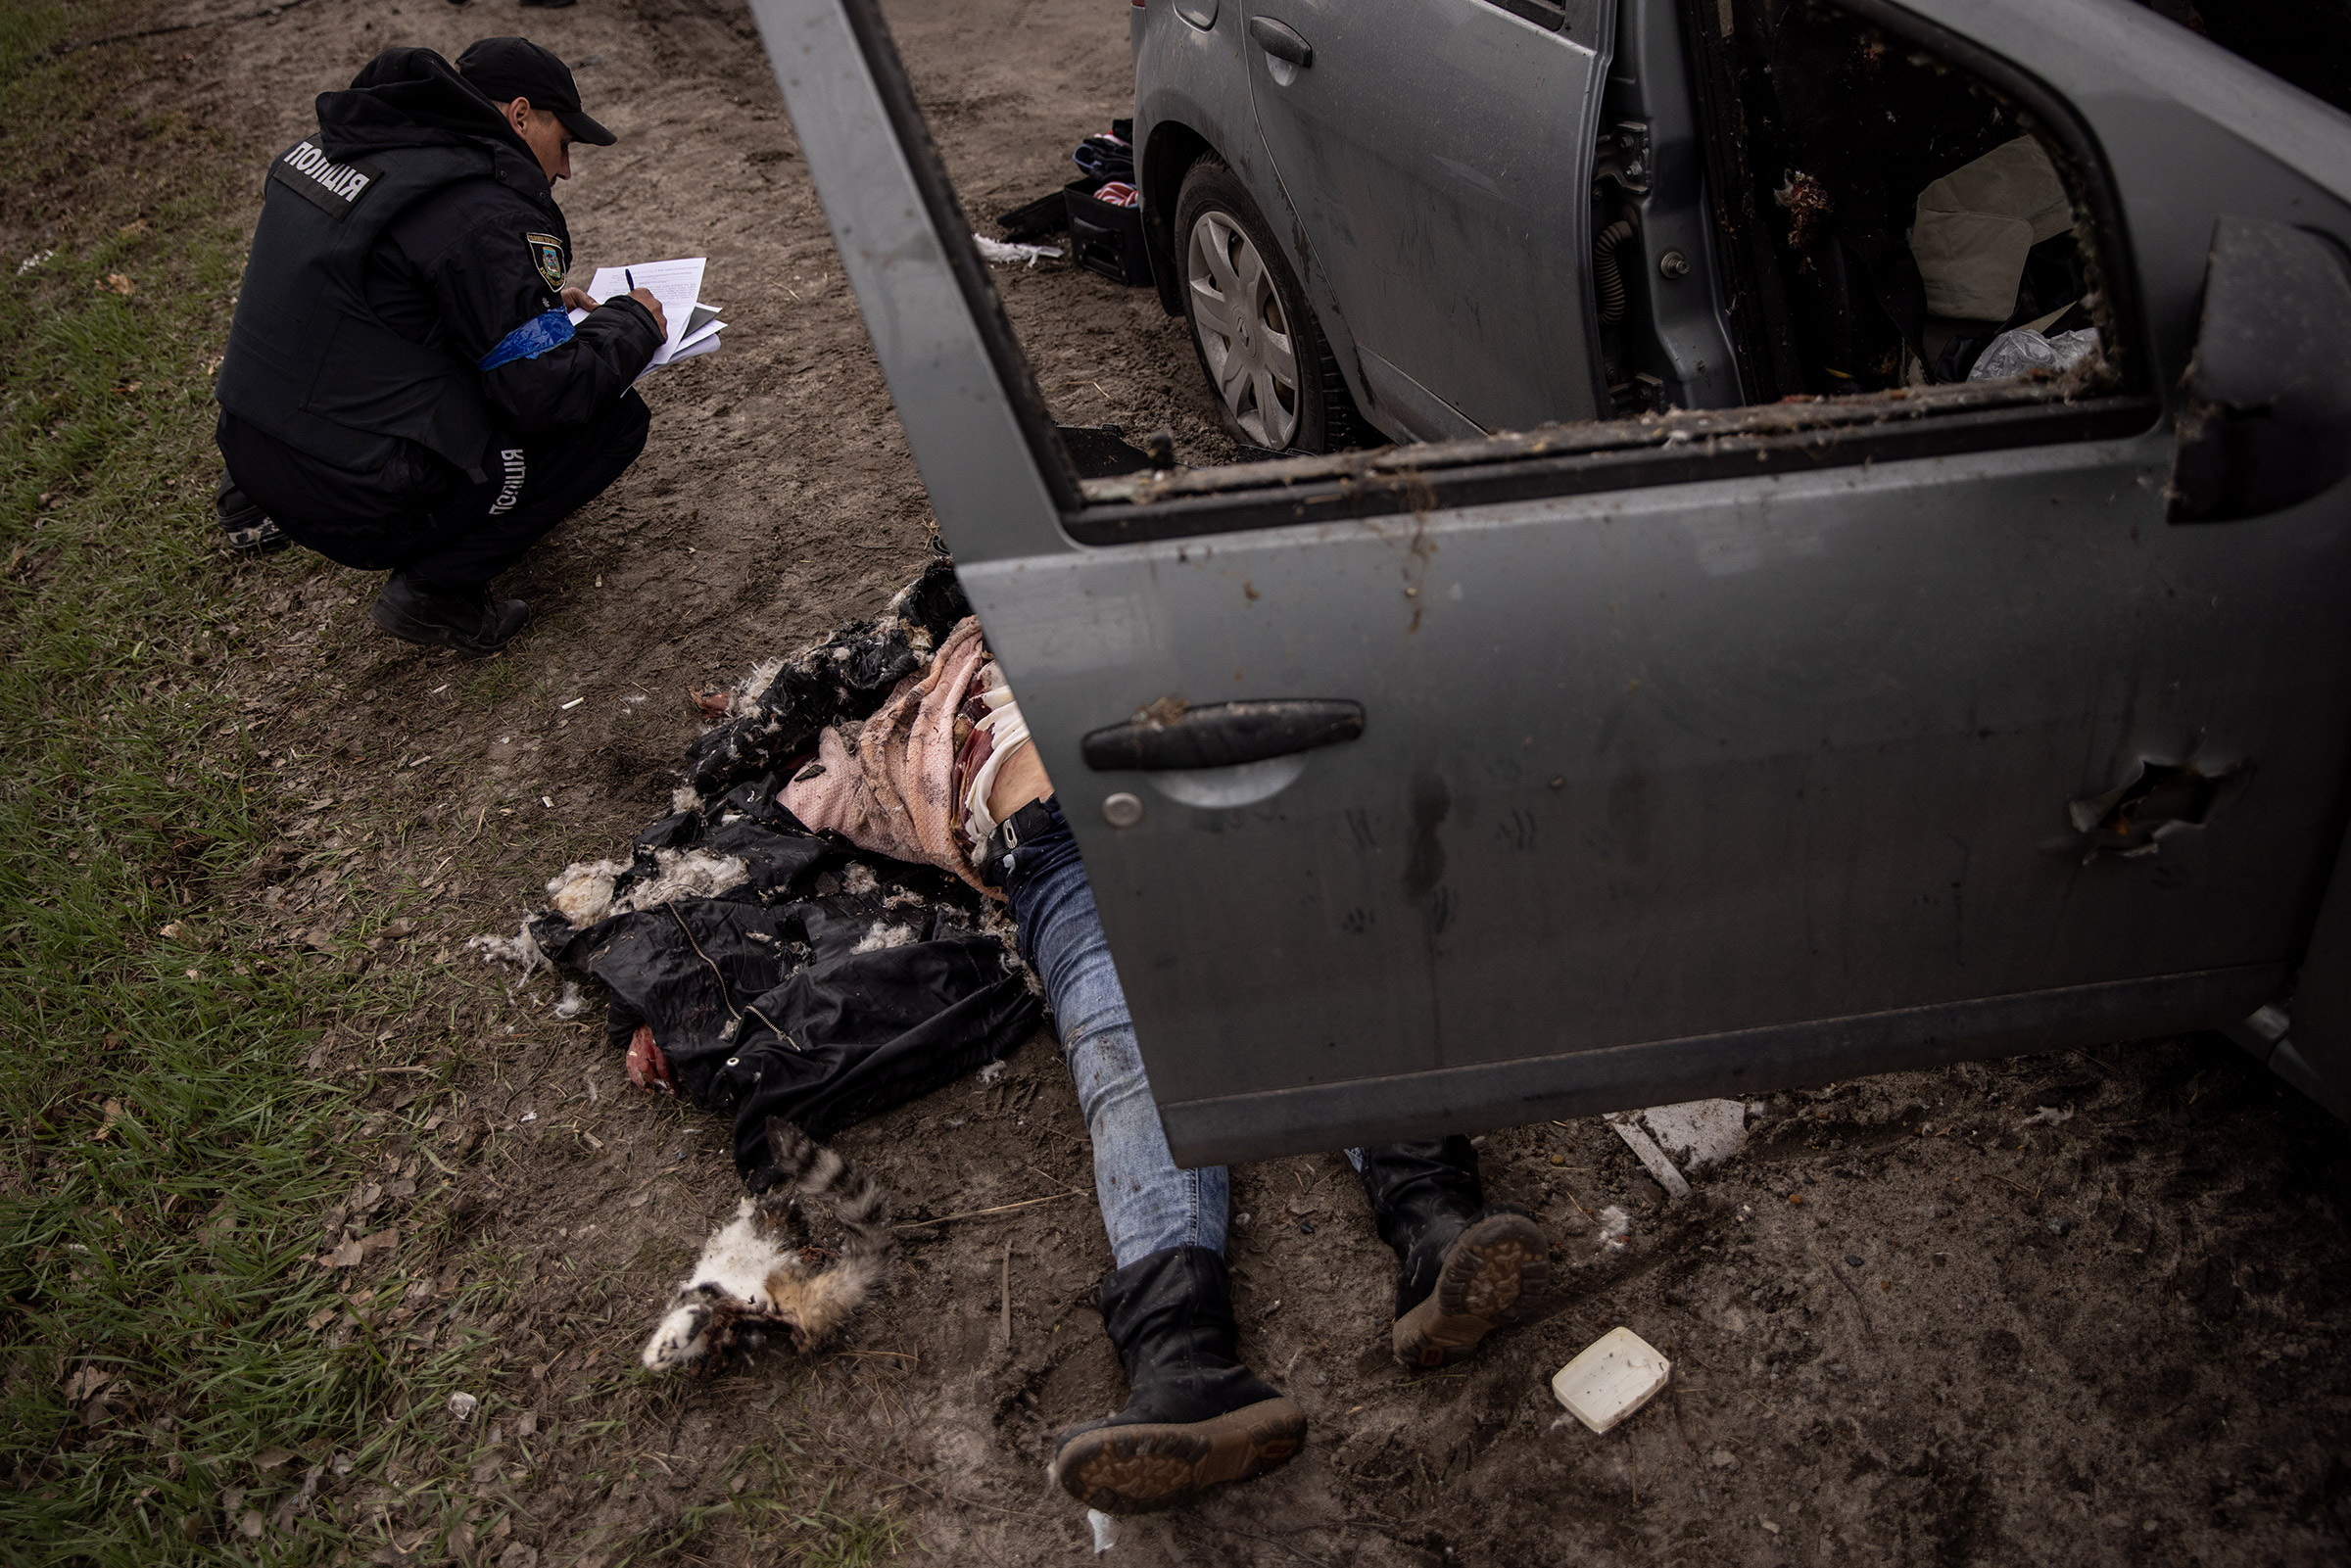 A police officer takes details after a woman's body was found in a car shot in Bucha, Ukraine, on April 6, 2022.